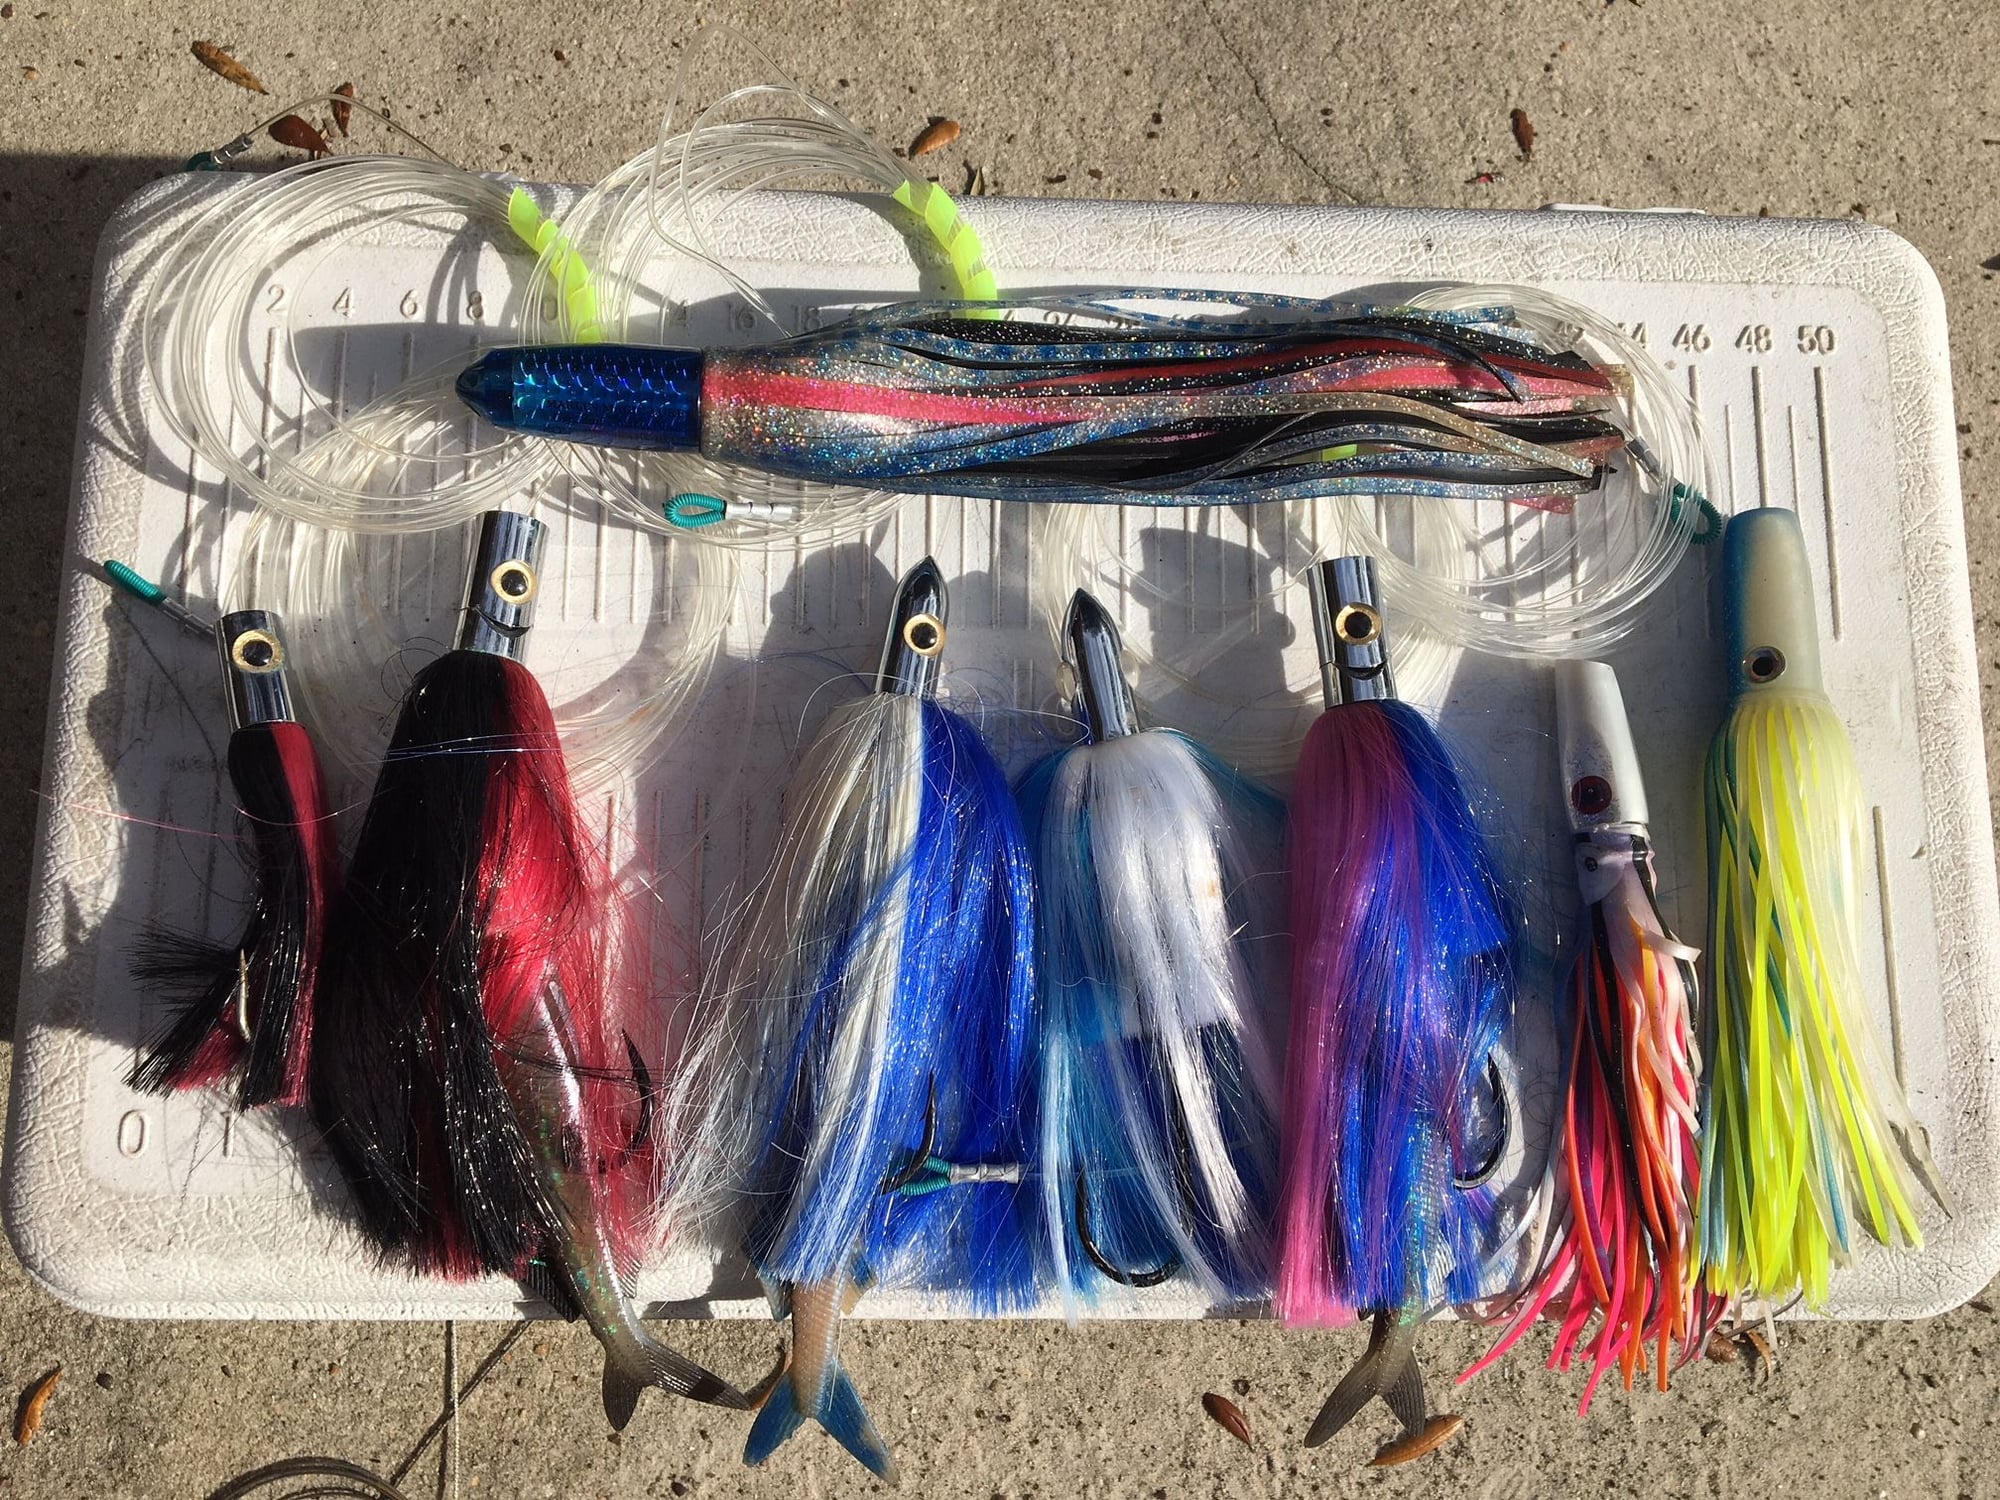 LURES for Sale - The Hull Truth - Boating and Fishing Forum